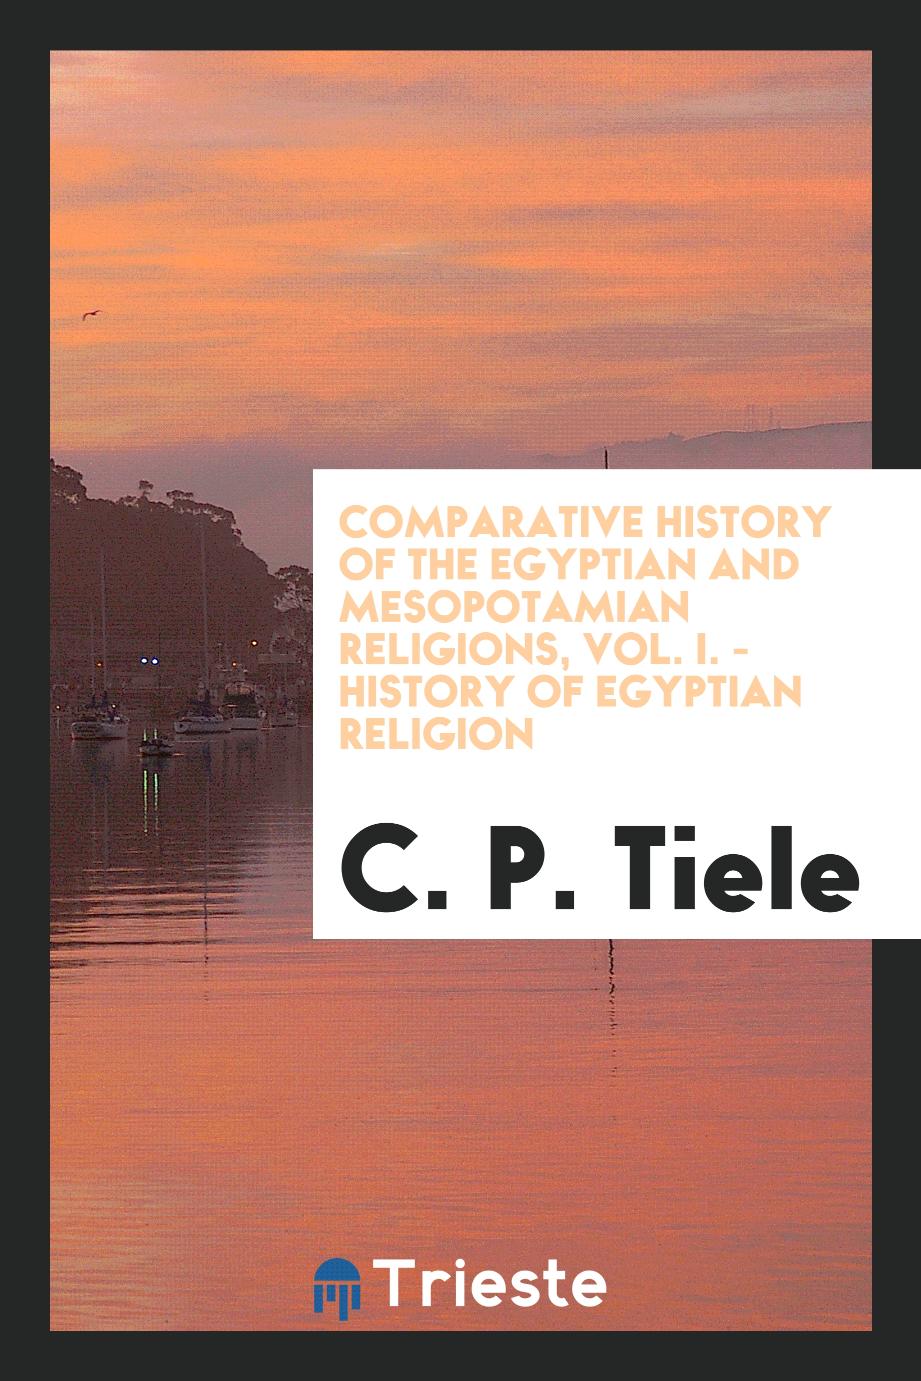 Comparative history of the Egyptian and Mesopotamian religions, Vol. I. - History of Egyptian religion